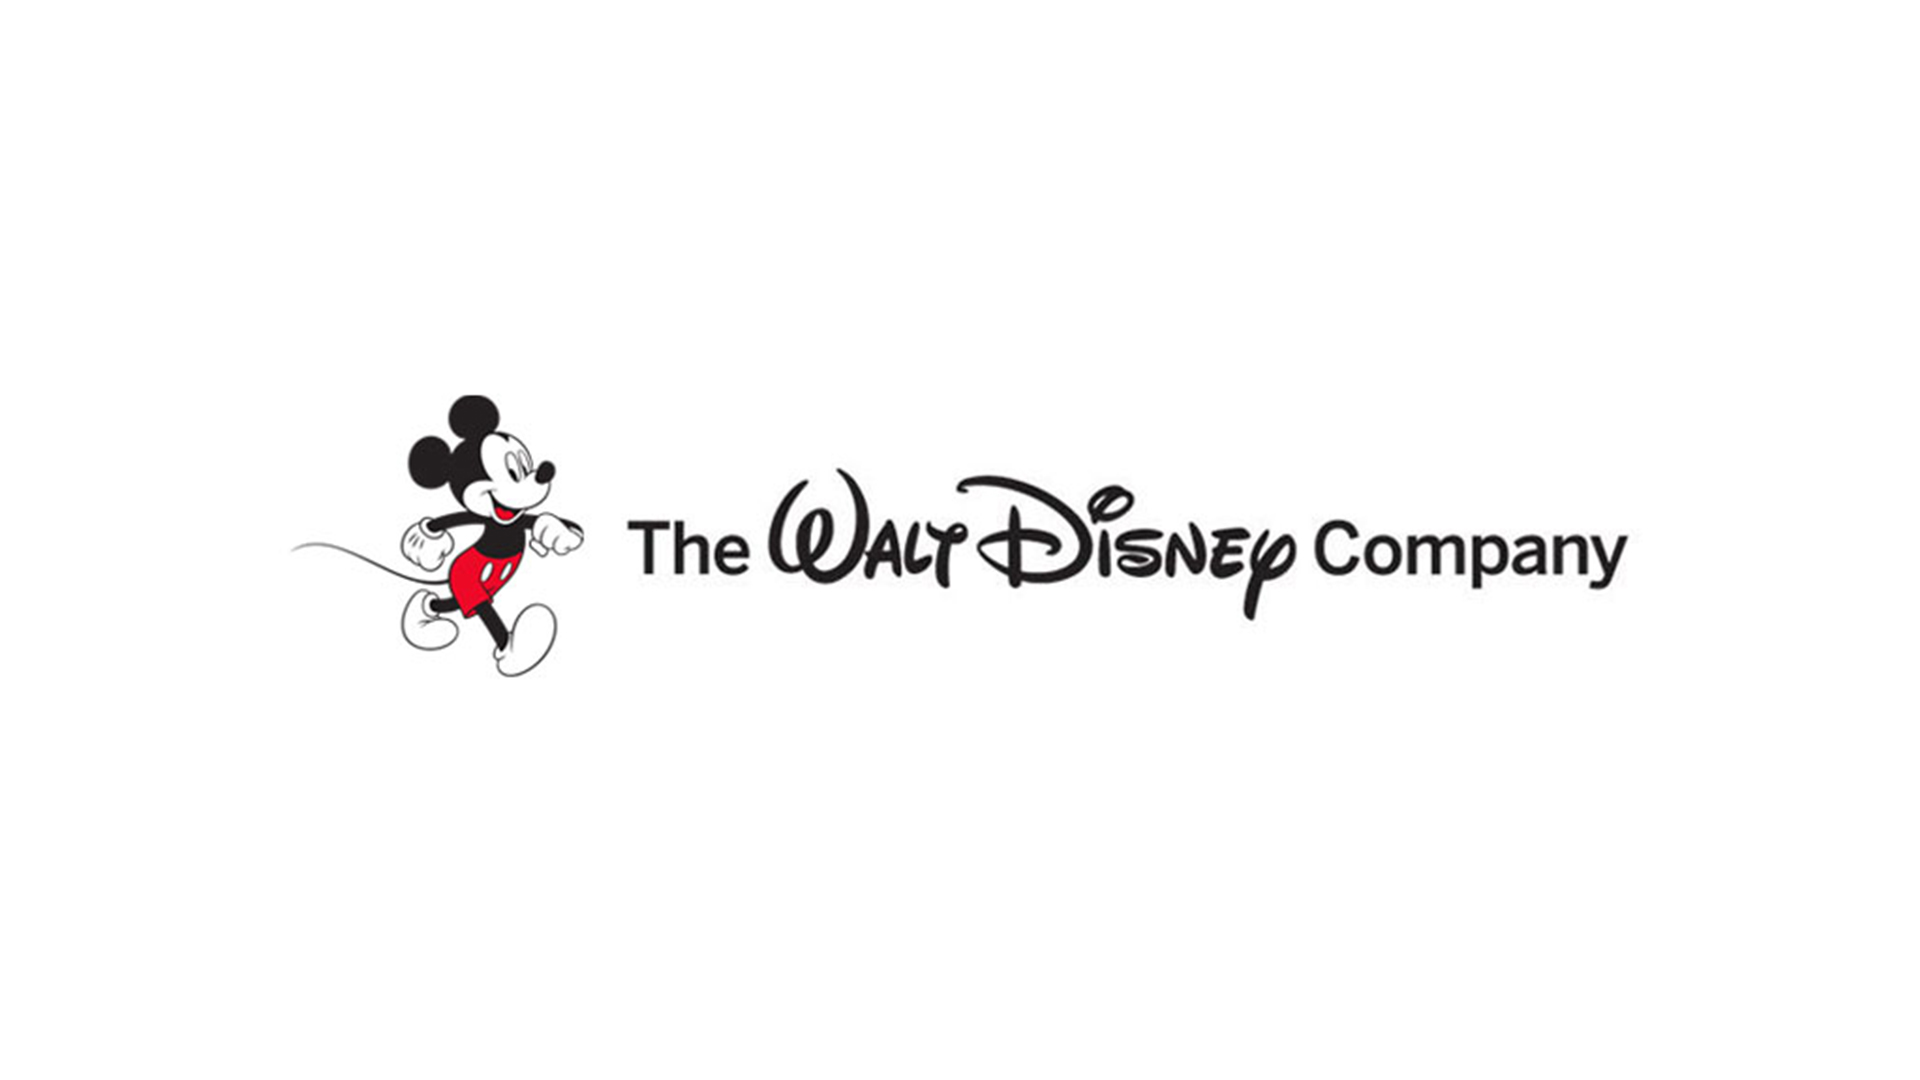 The Walt Disney Company Announces Annual Shareholder Meeting and Makes Case for Board Nominees